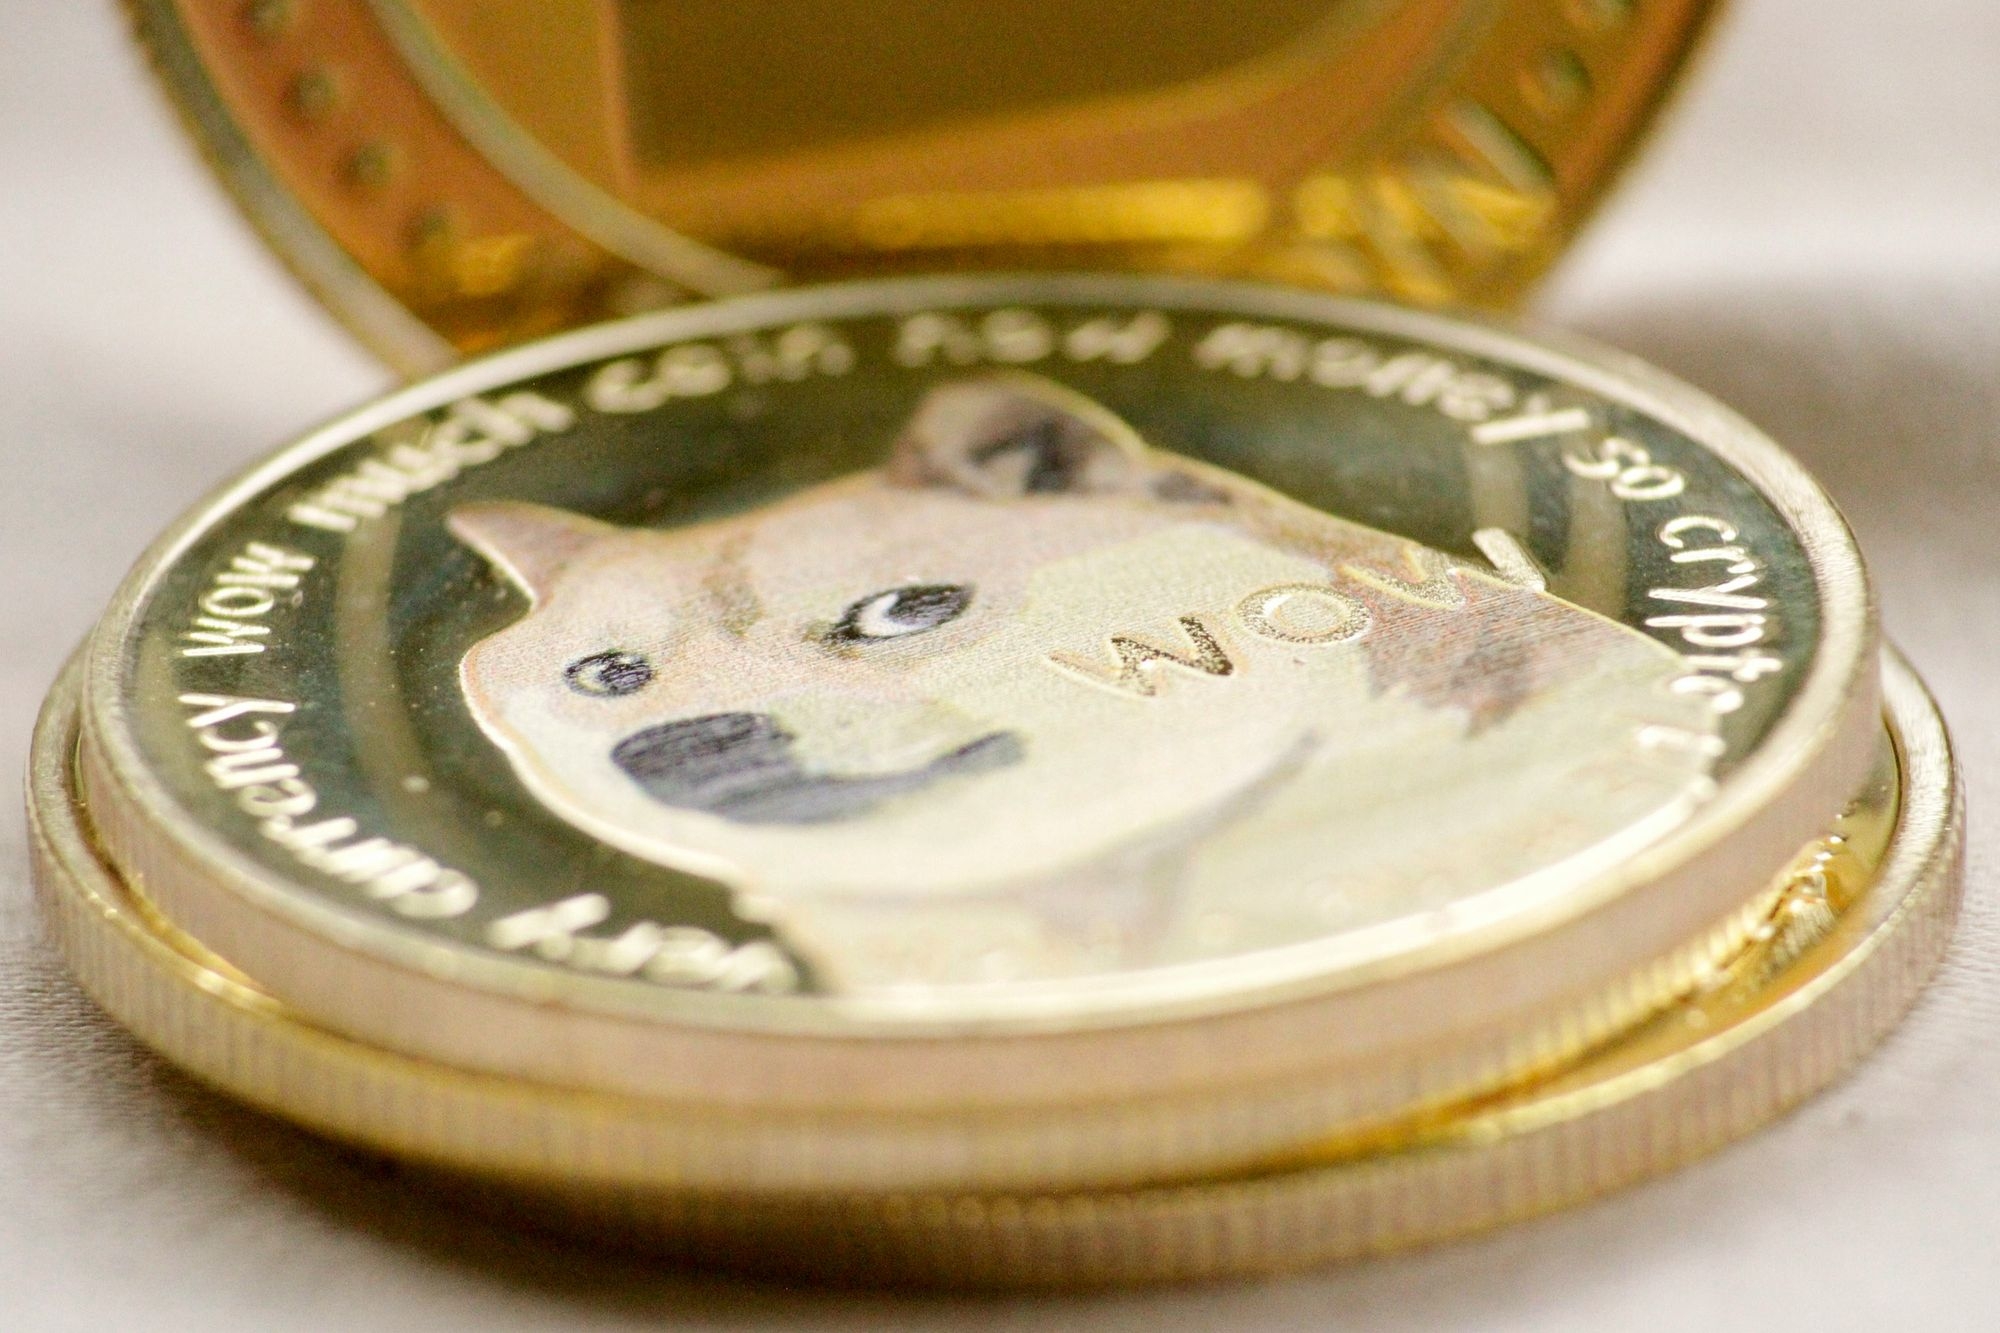 Representation of Dogecoin in form of a coin.